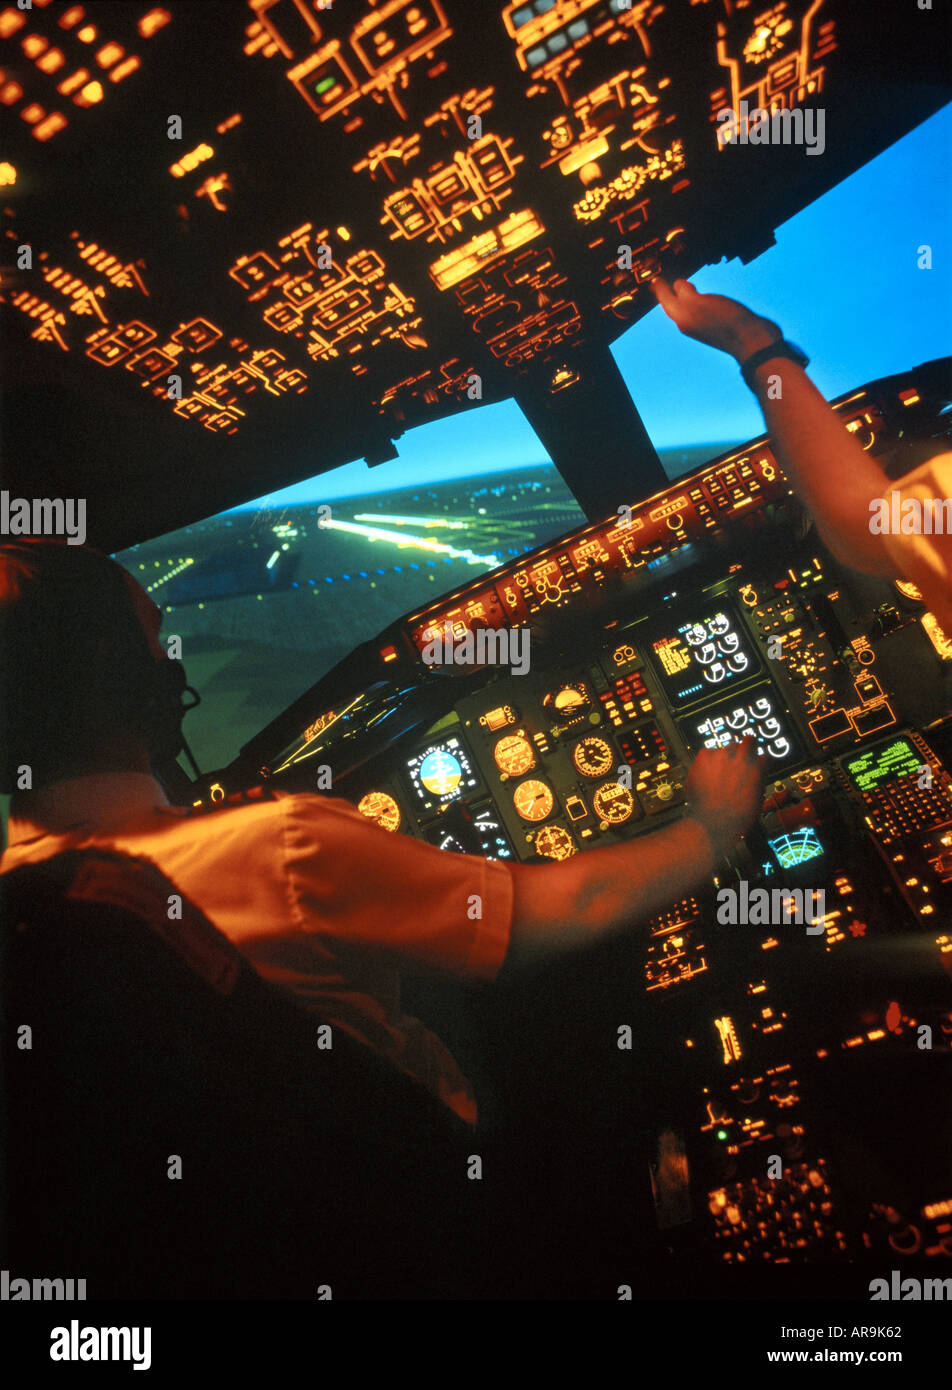 Boeing 757 jet airliner cockpit pilots at the controls on final approach to land with one engine failed Stock Photo